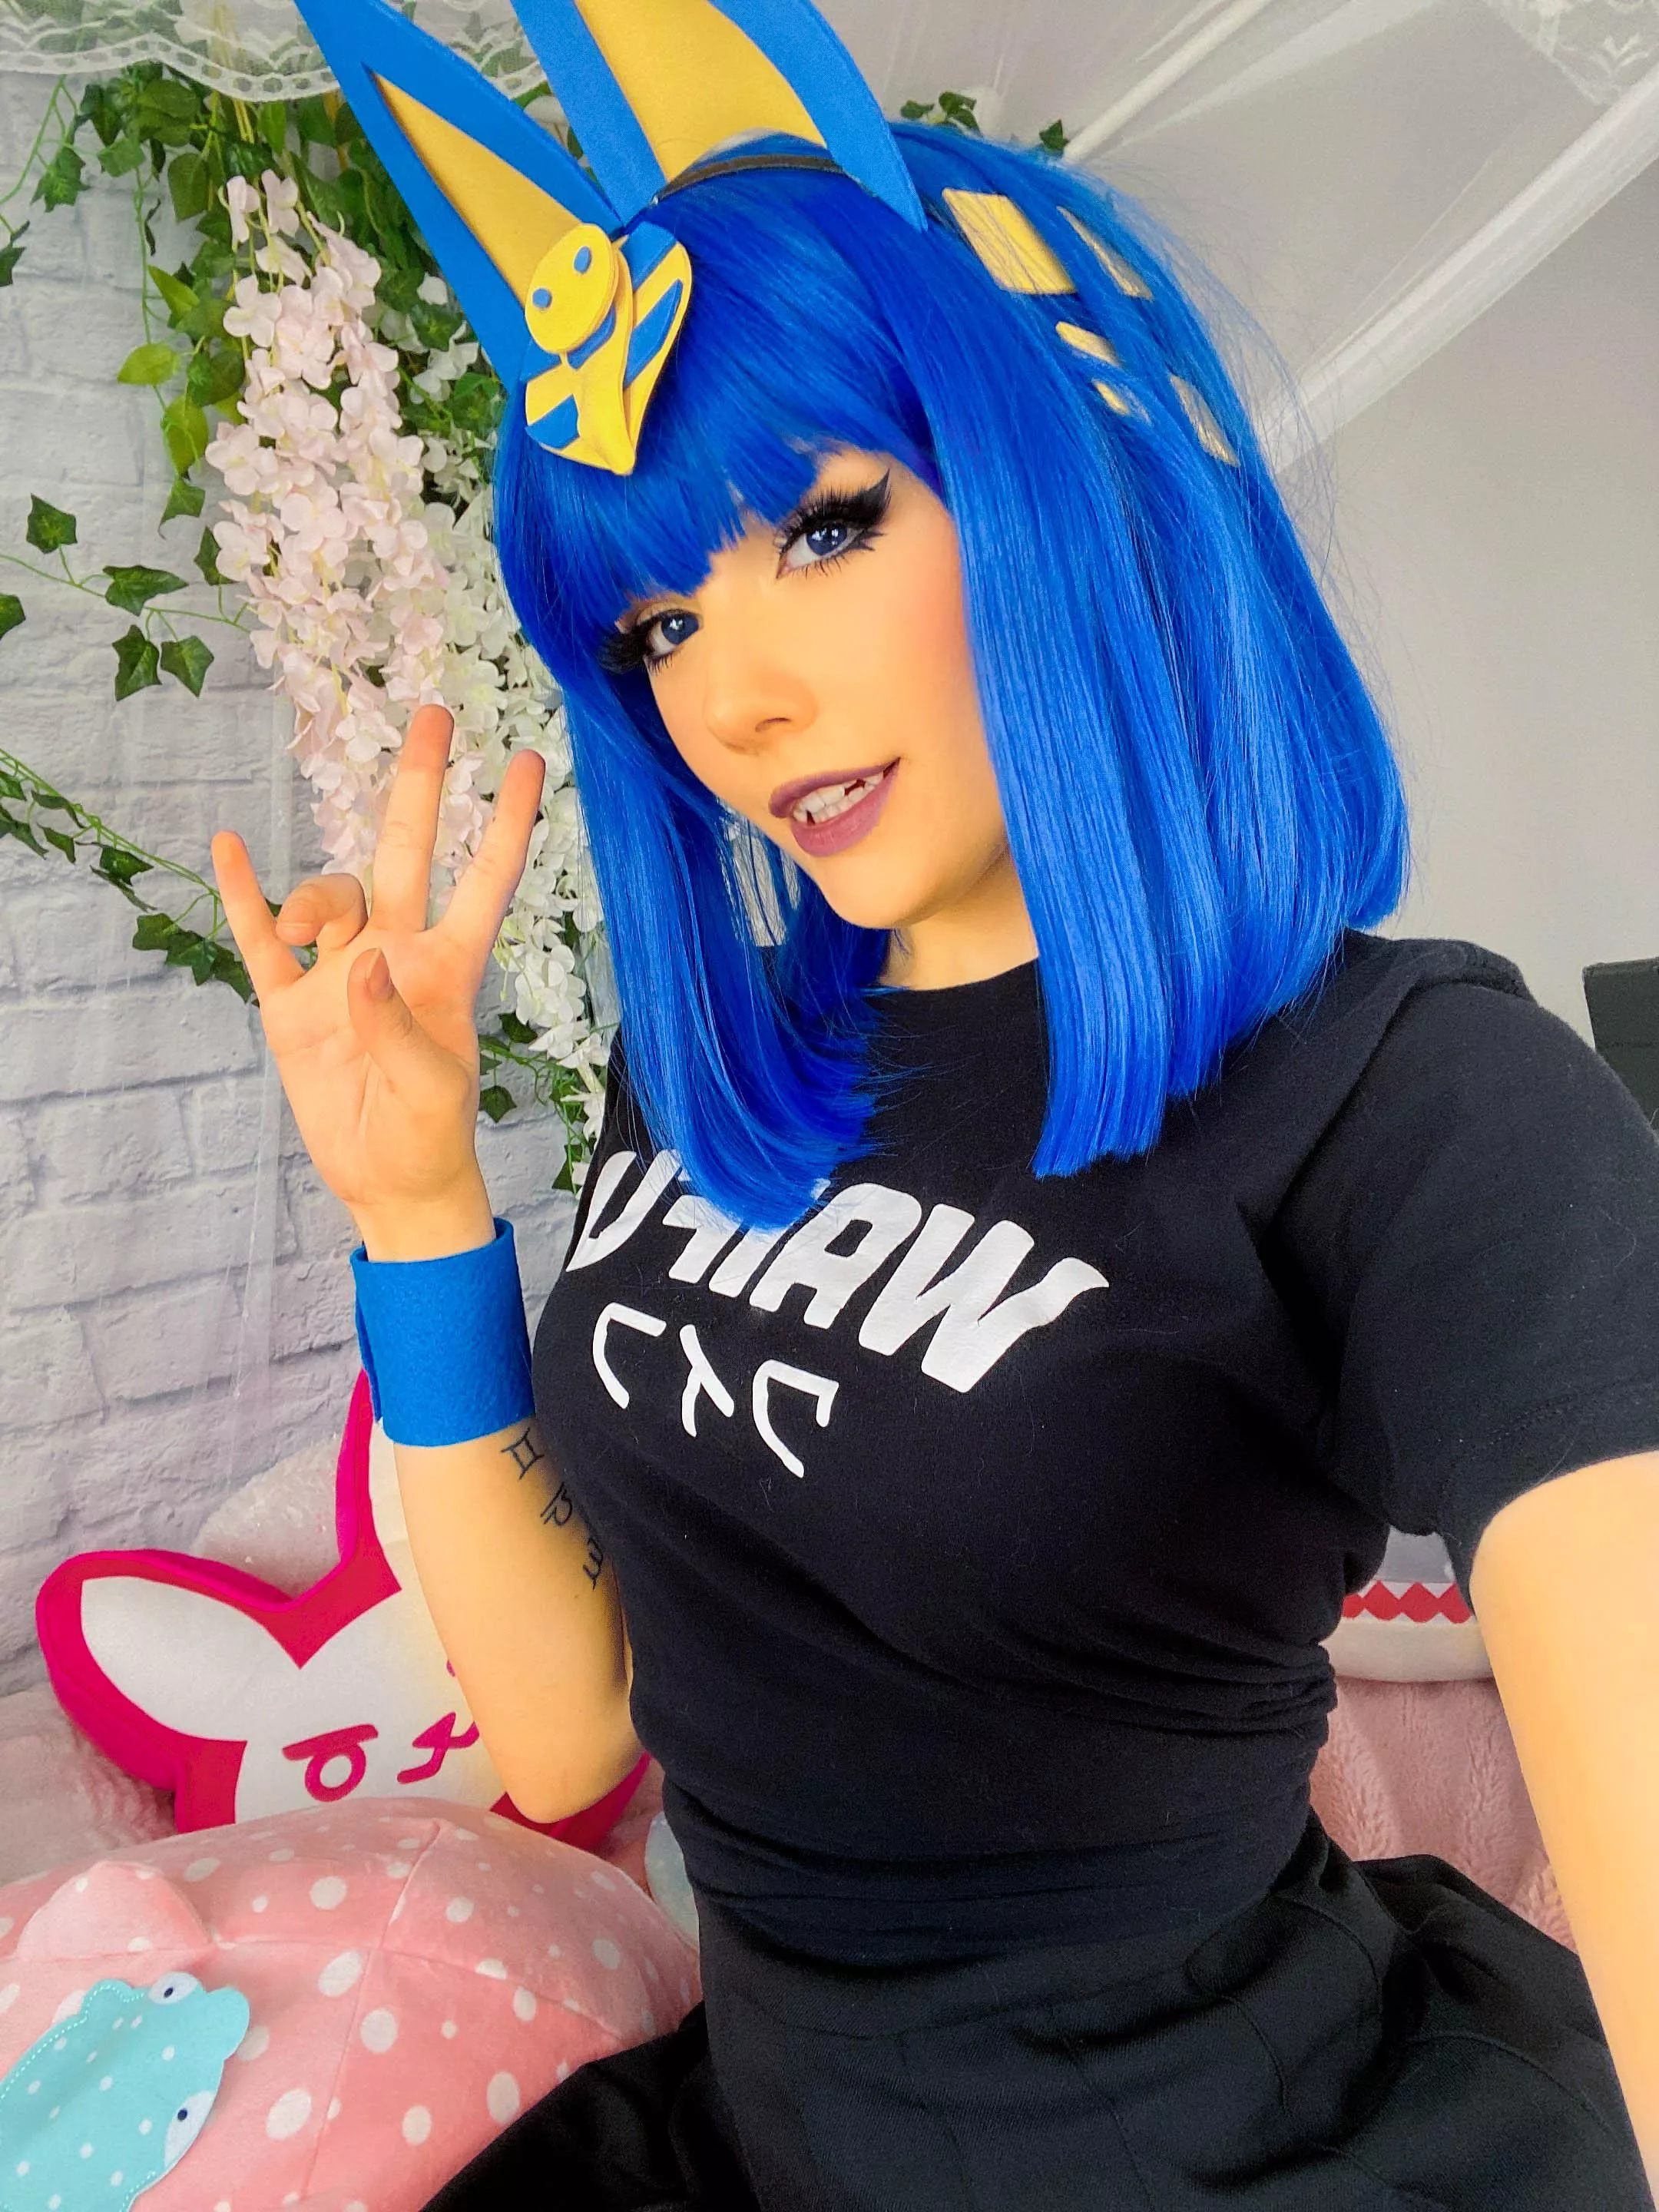 Ankha By Meggii Cosplay Nudes Cosplaygirls Nude Pics Org